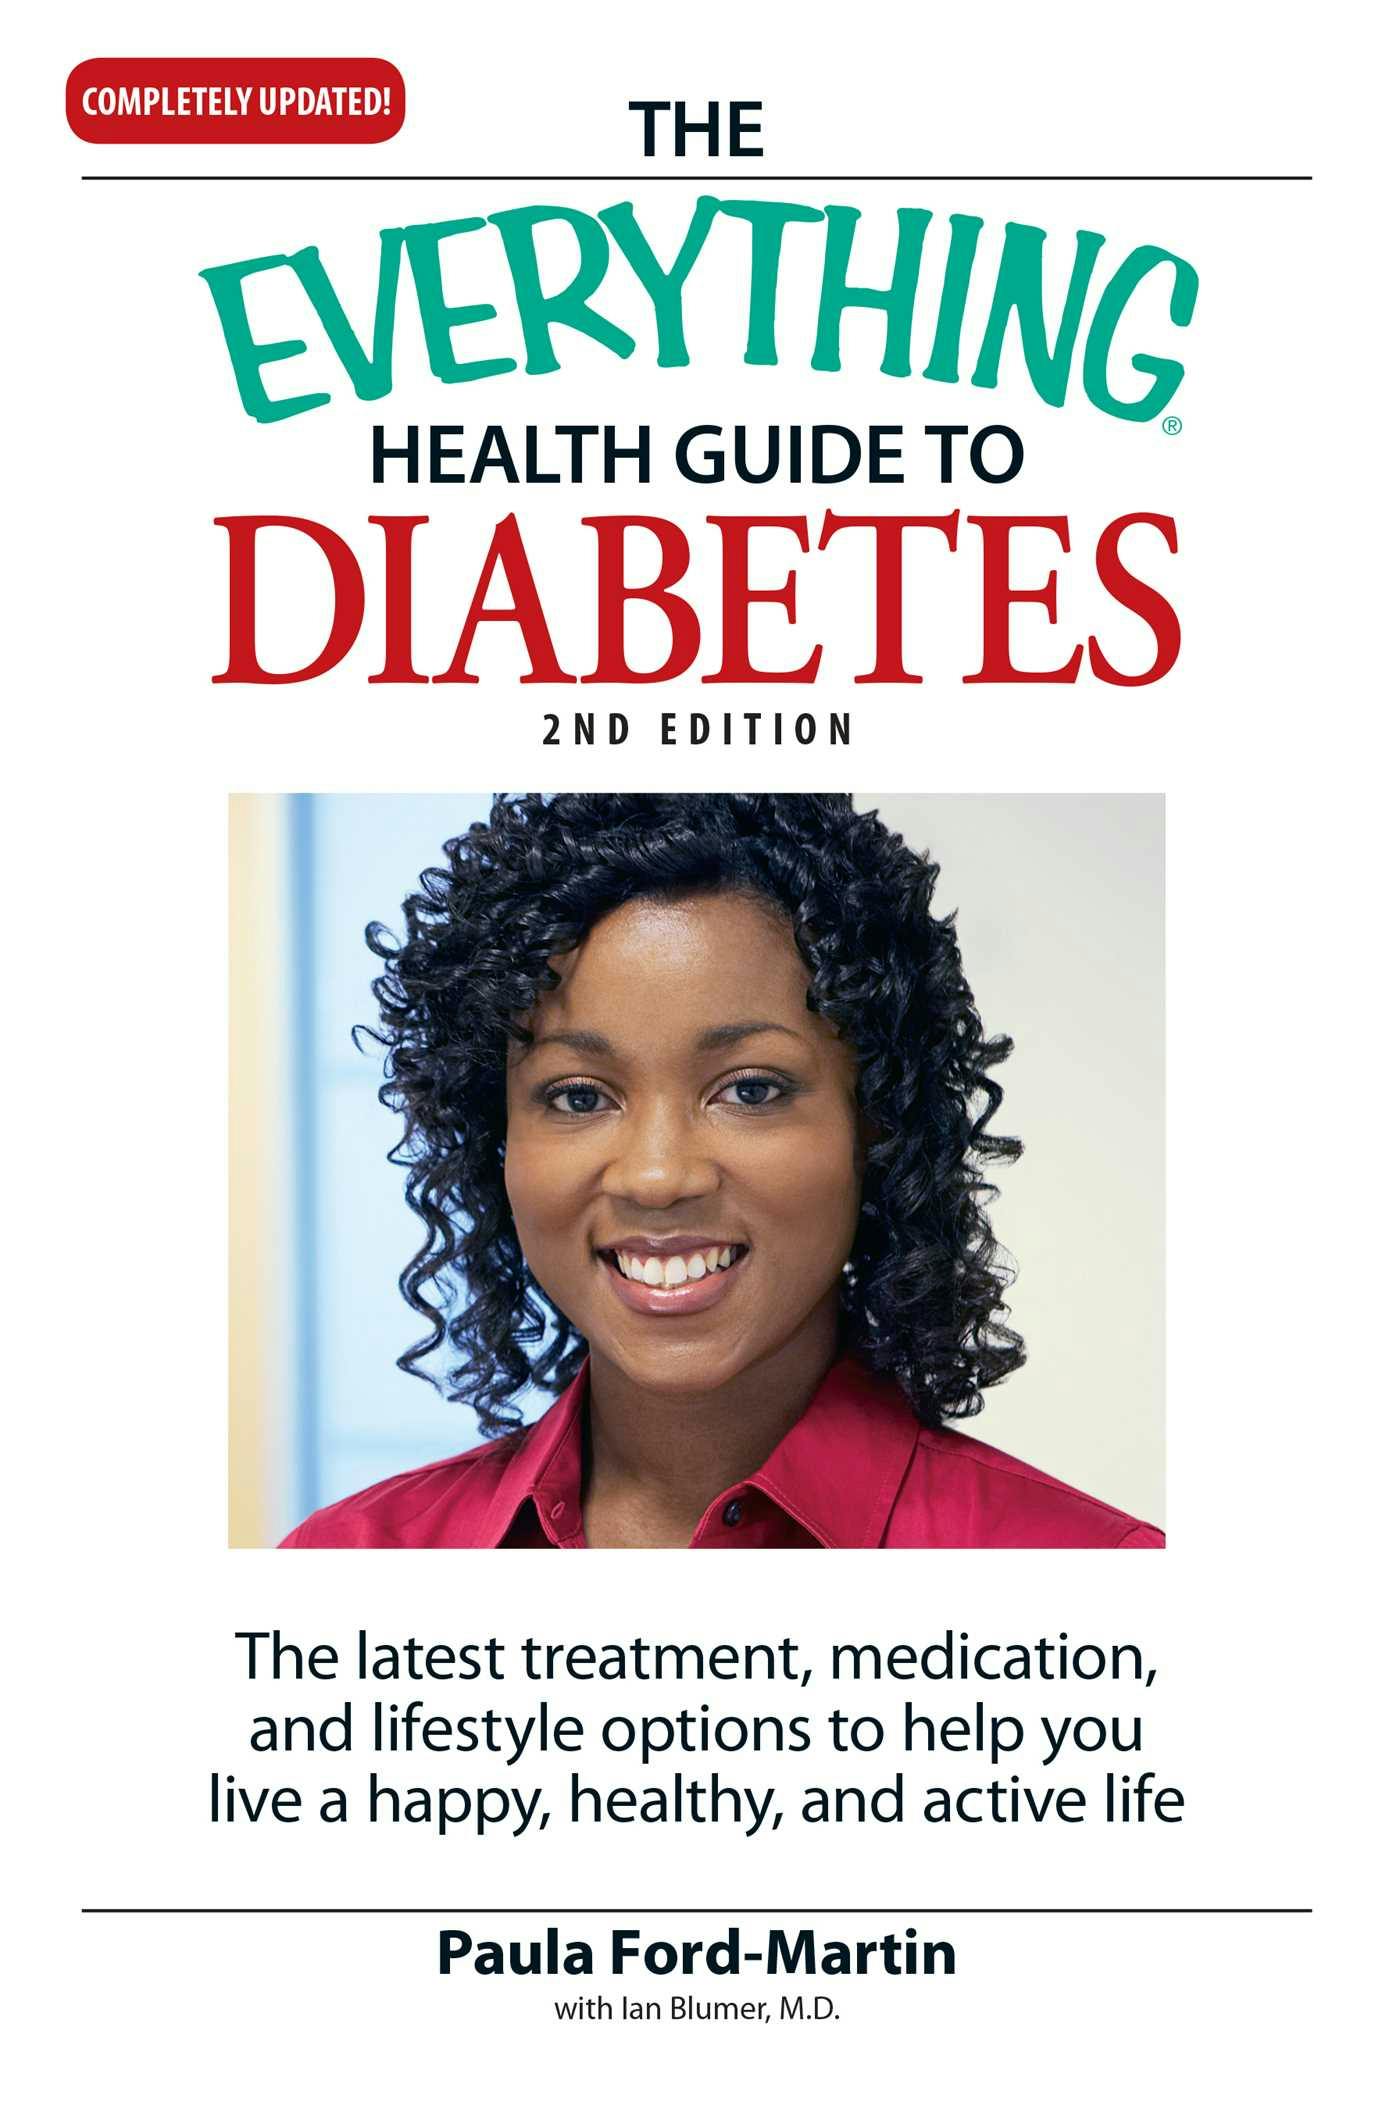 The Everything Health Guide to Diabetes: The latest treatment, medication, and lifestyle options to help you live a happy, healthy, and active life - Paula Ford-Martin, Ian Blummer